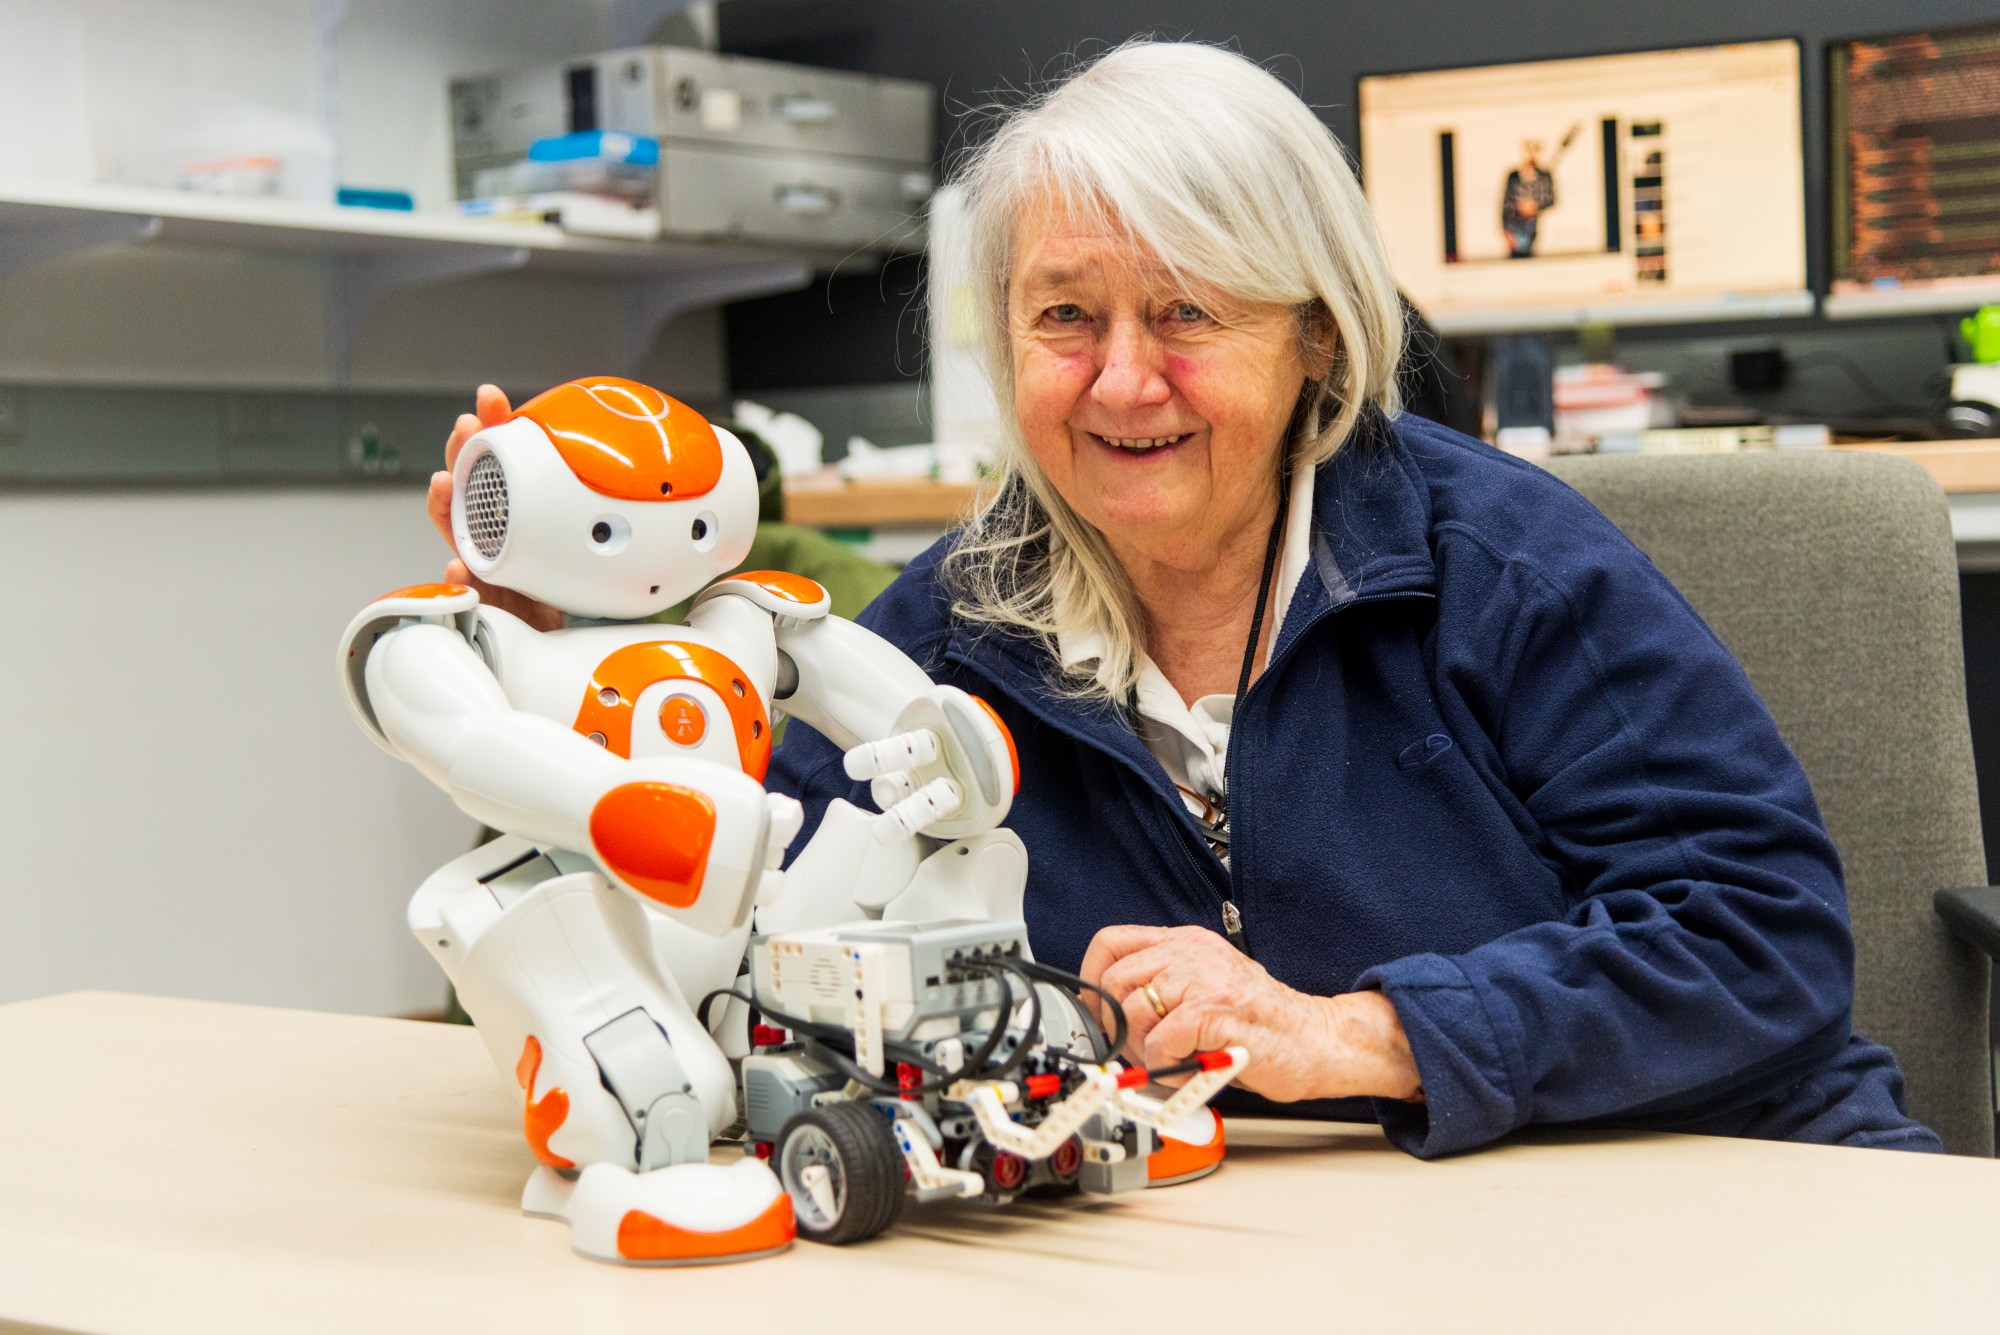 Professor of Robotics Dr. Maria Gini poses for a portrait with a small robot in Shepherd Labs on Thursday, Feb. 6. The University of Minnesota is set to begin offering a Master’s program for robotics in Fall of 2020.